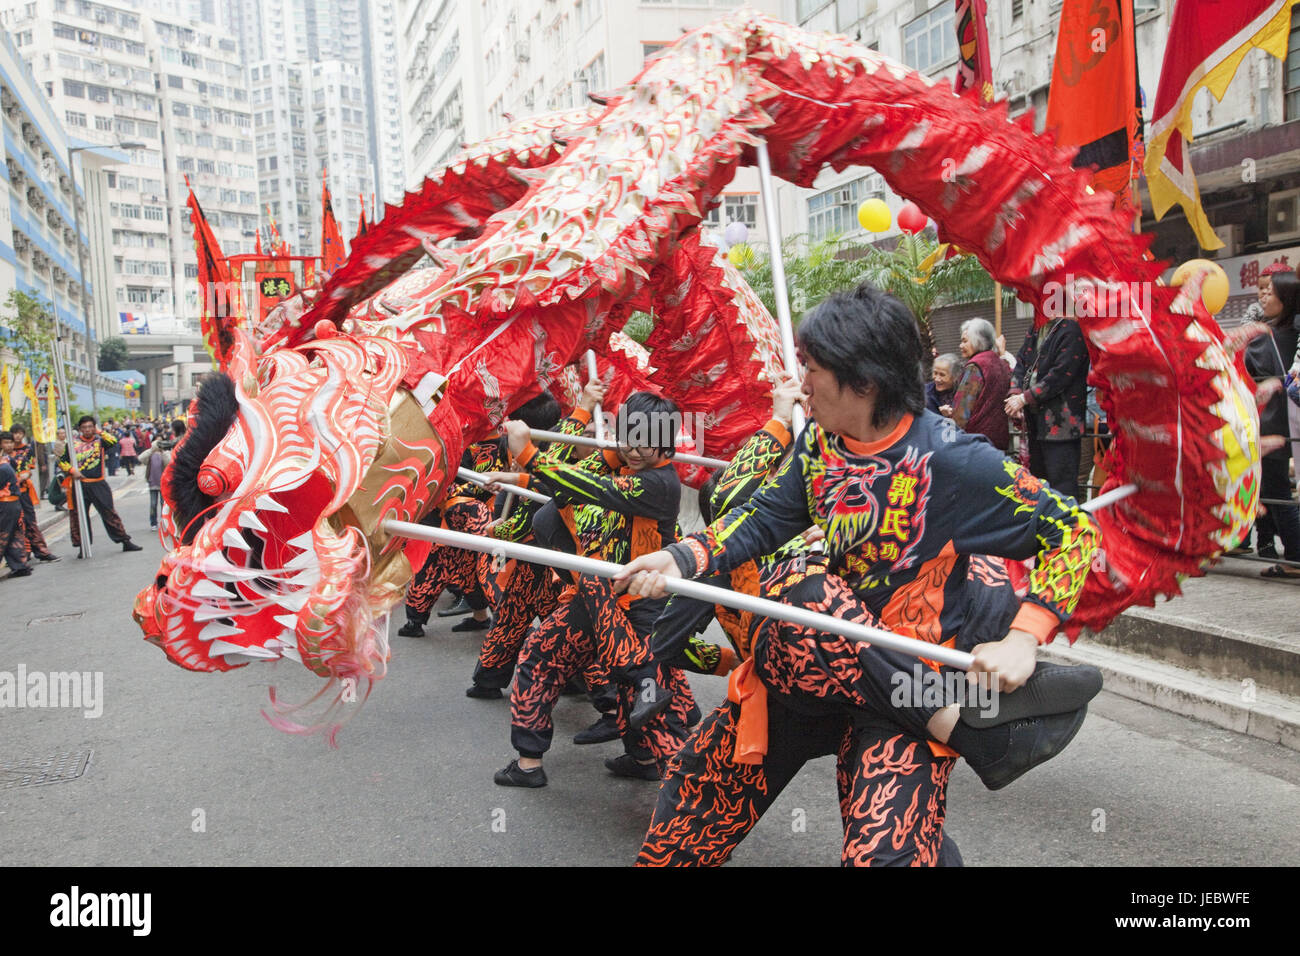 China, Hong Kong, dragon's dance, men, tradition, mass, tourism, save, dragon's dance, dance, culture, paper dragon, dragon, in Chinese, cogs, bite, person, tourist, Stock Photo